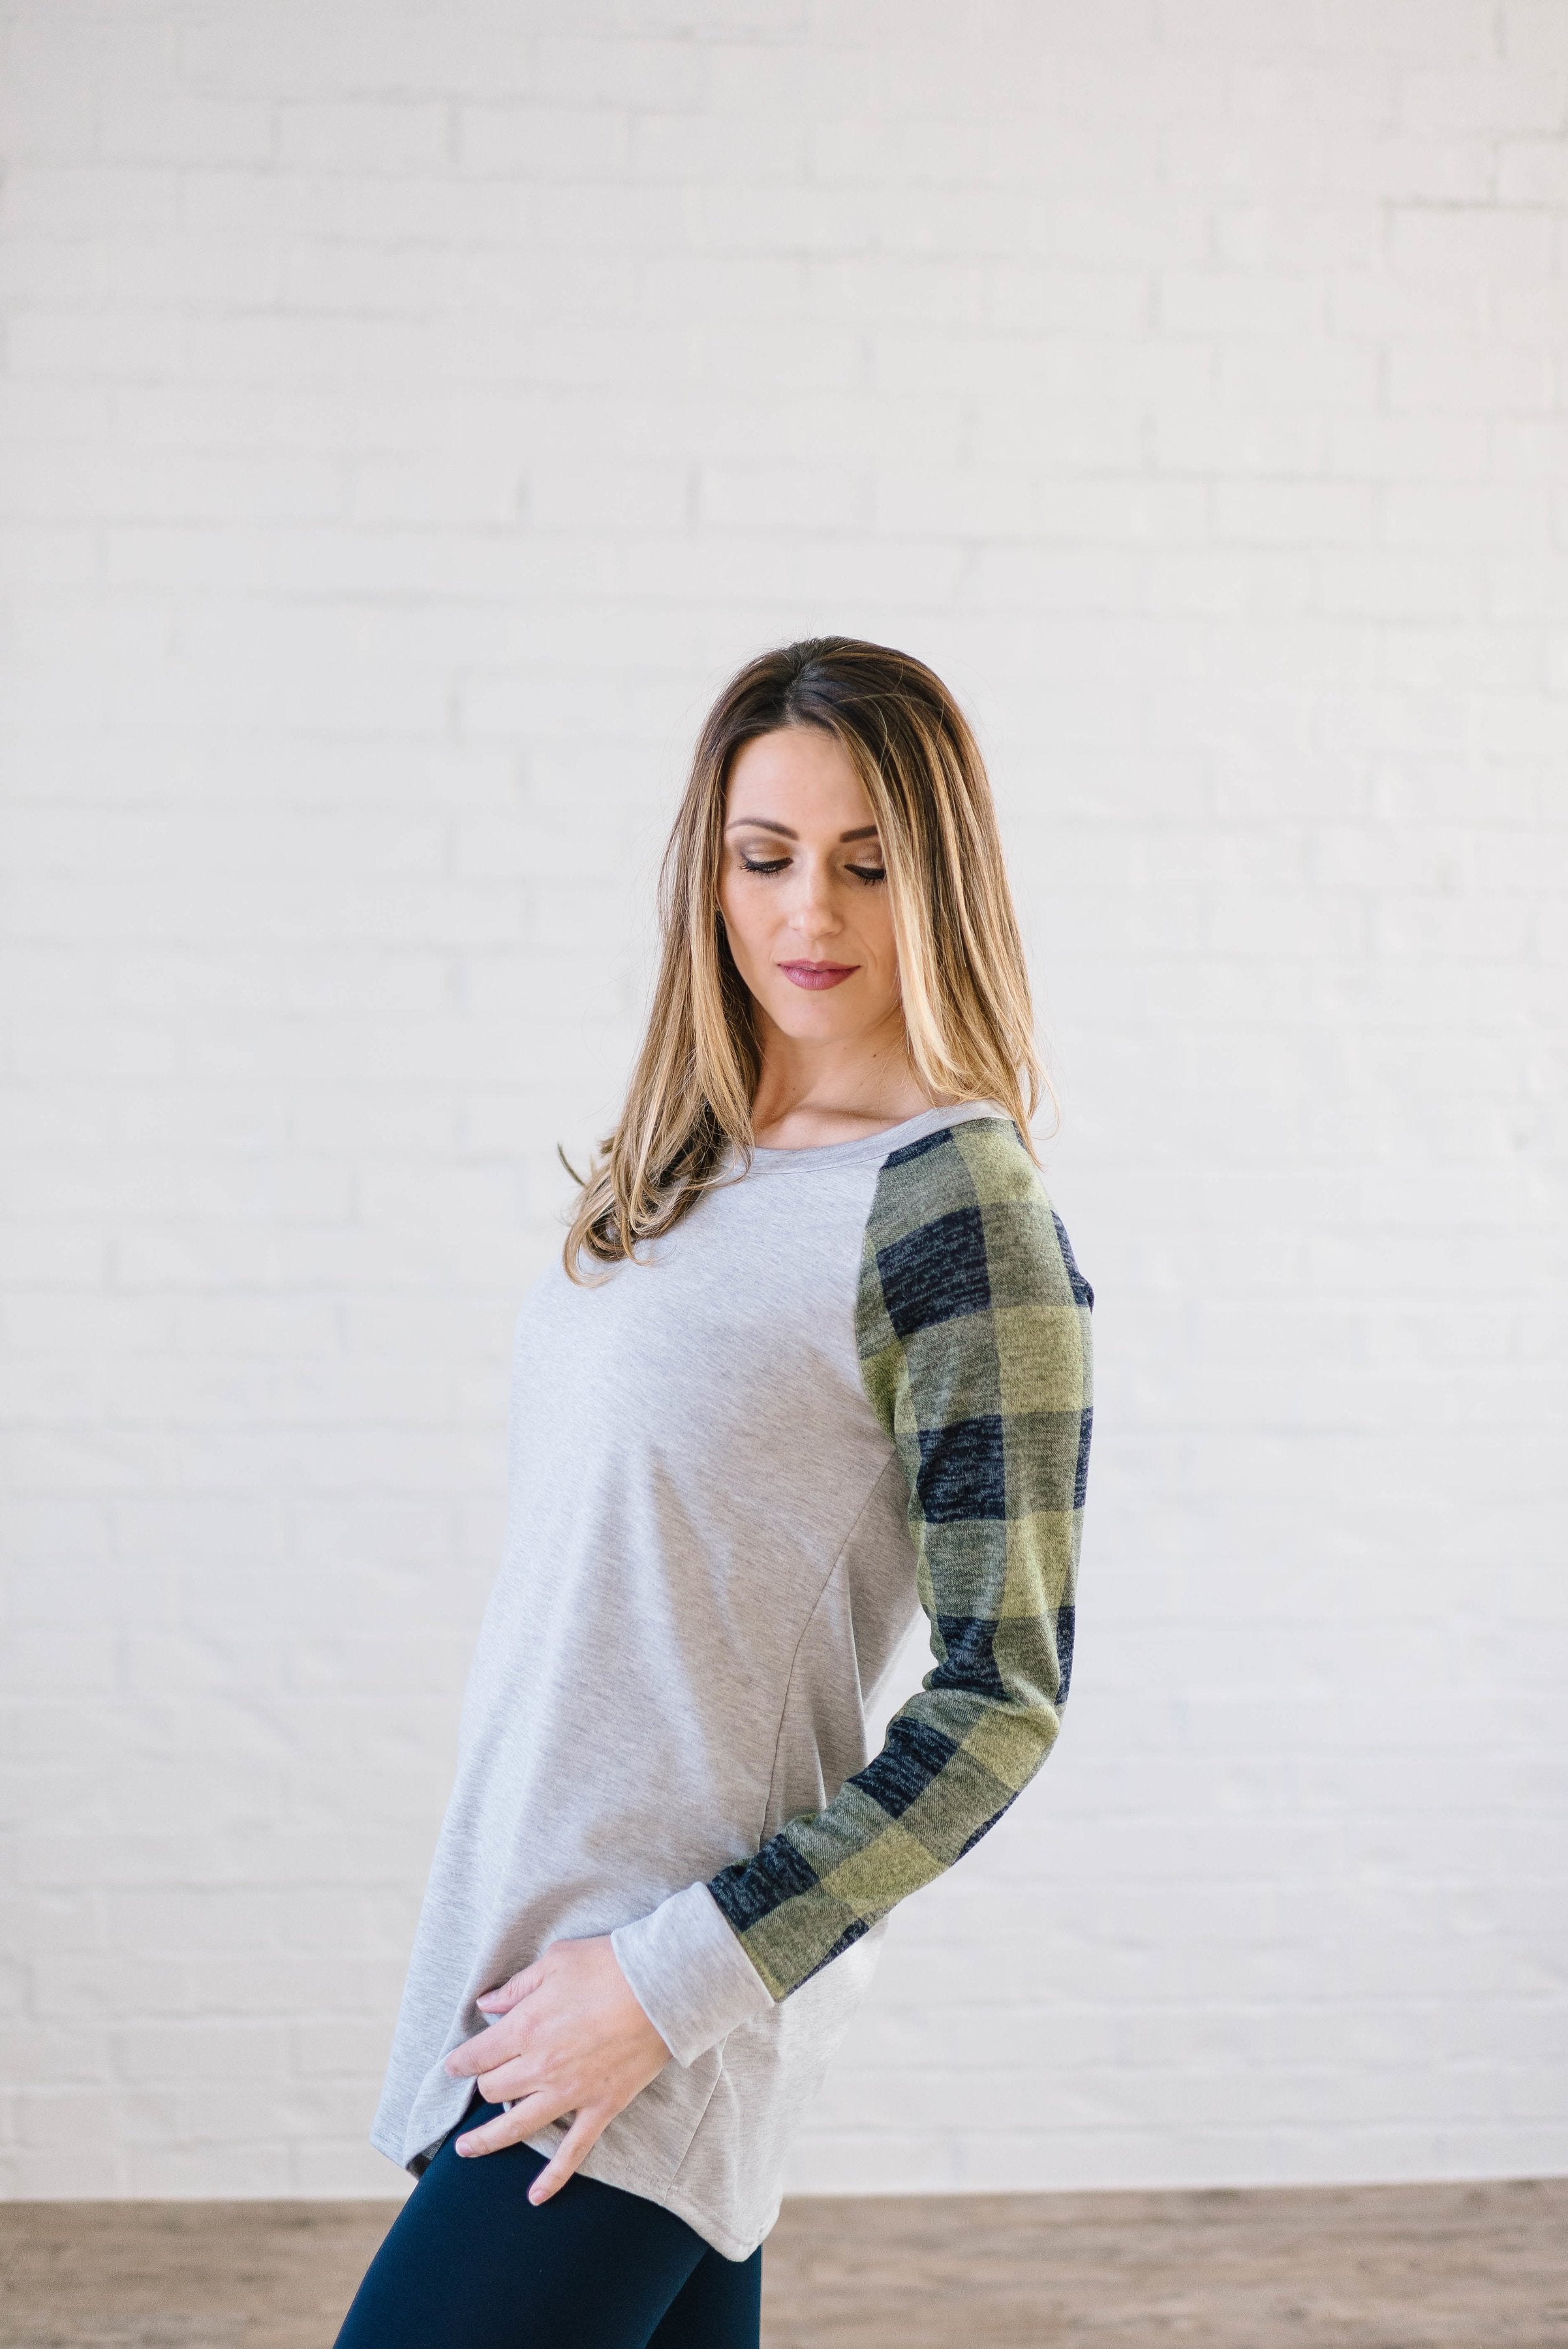 The Cooper Casual Top in Green & Gray